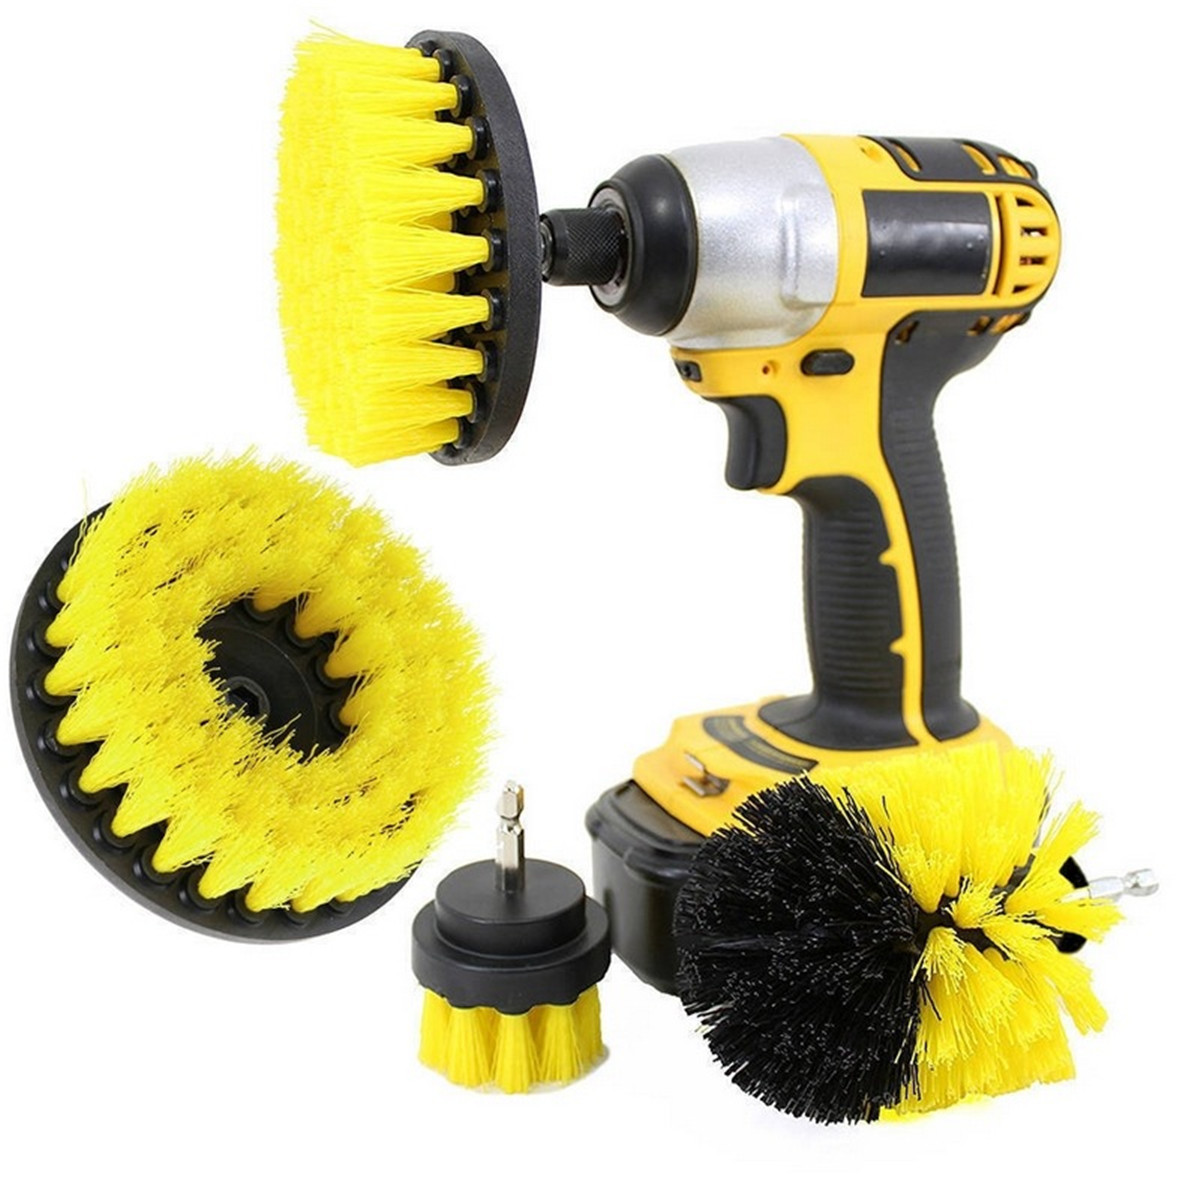 12Pcs-Drill-Brush-Set-Tub-Cleaner-Grout-Power-Scrubber-Cleaning-Attachments-Kit-1780037-8